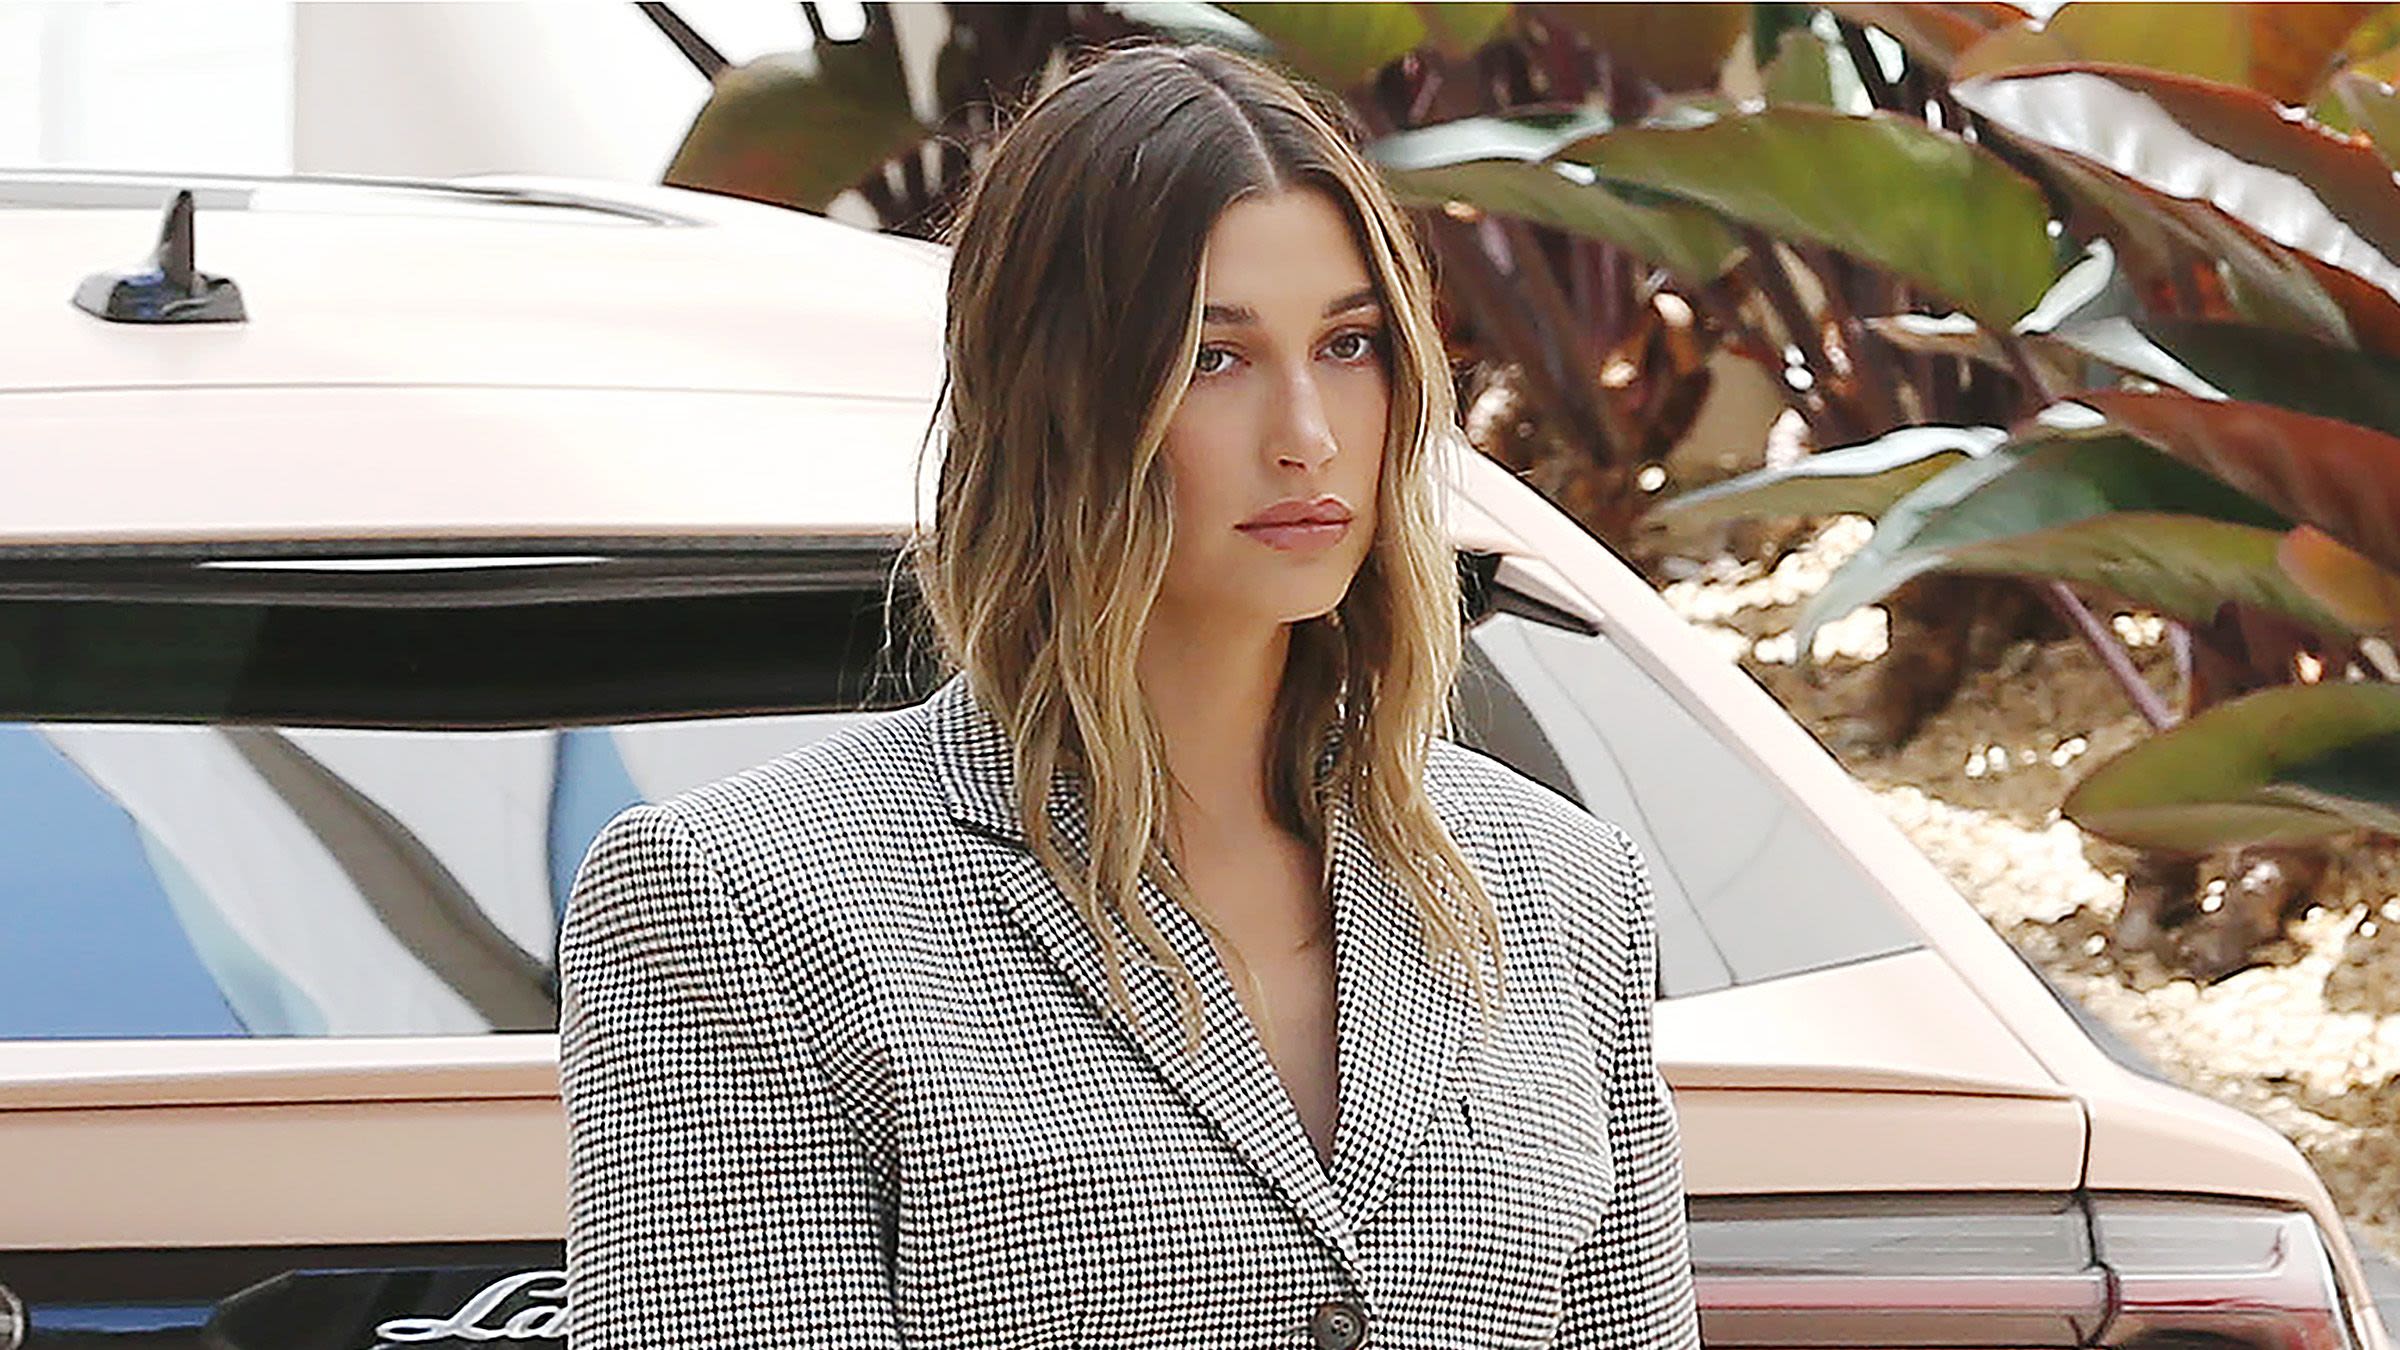 Hailey Bieber Paired A Crop Top With An Oversized Blazer In First Outing Since Pregnancy Announcement